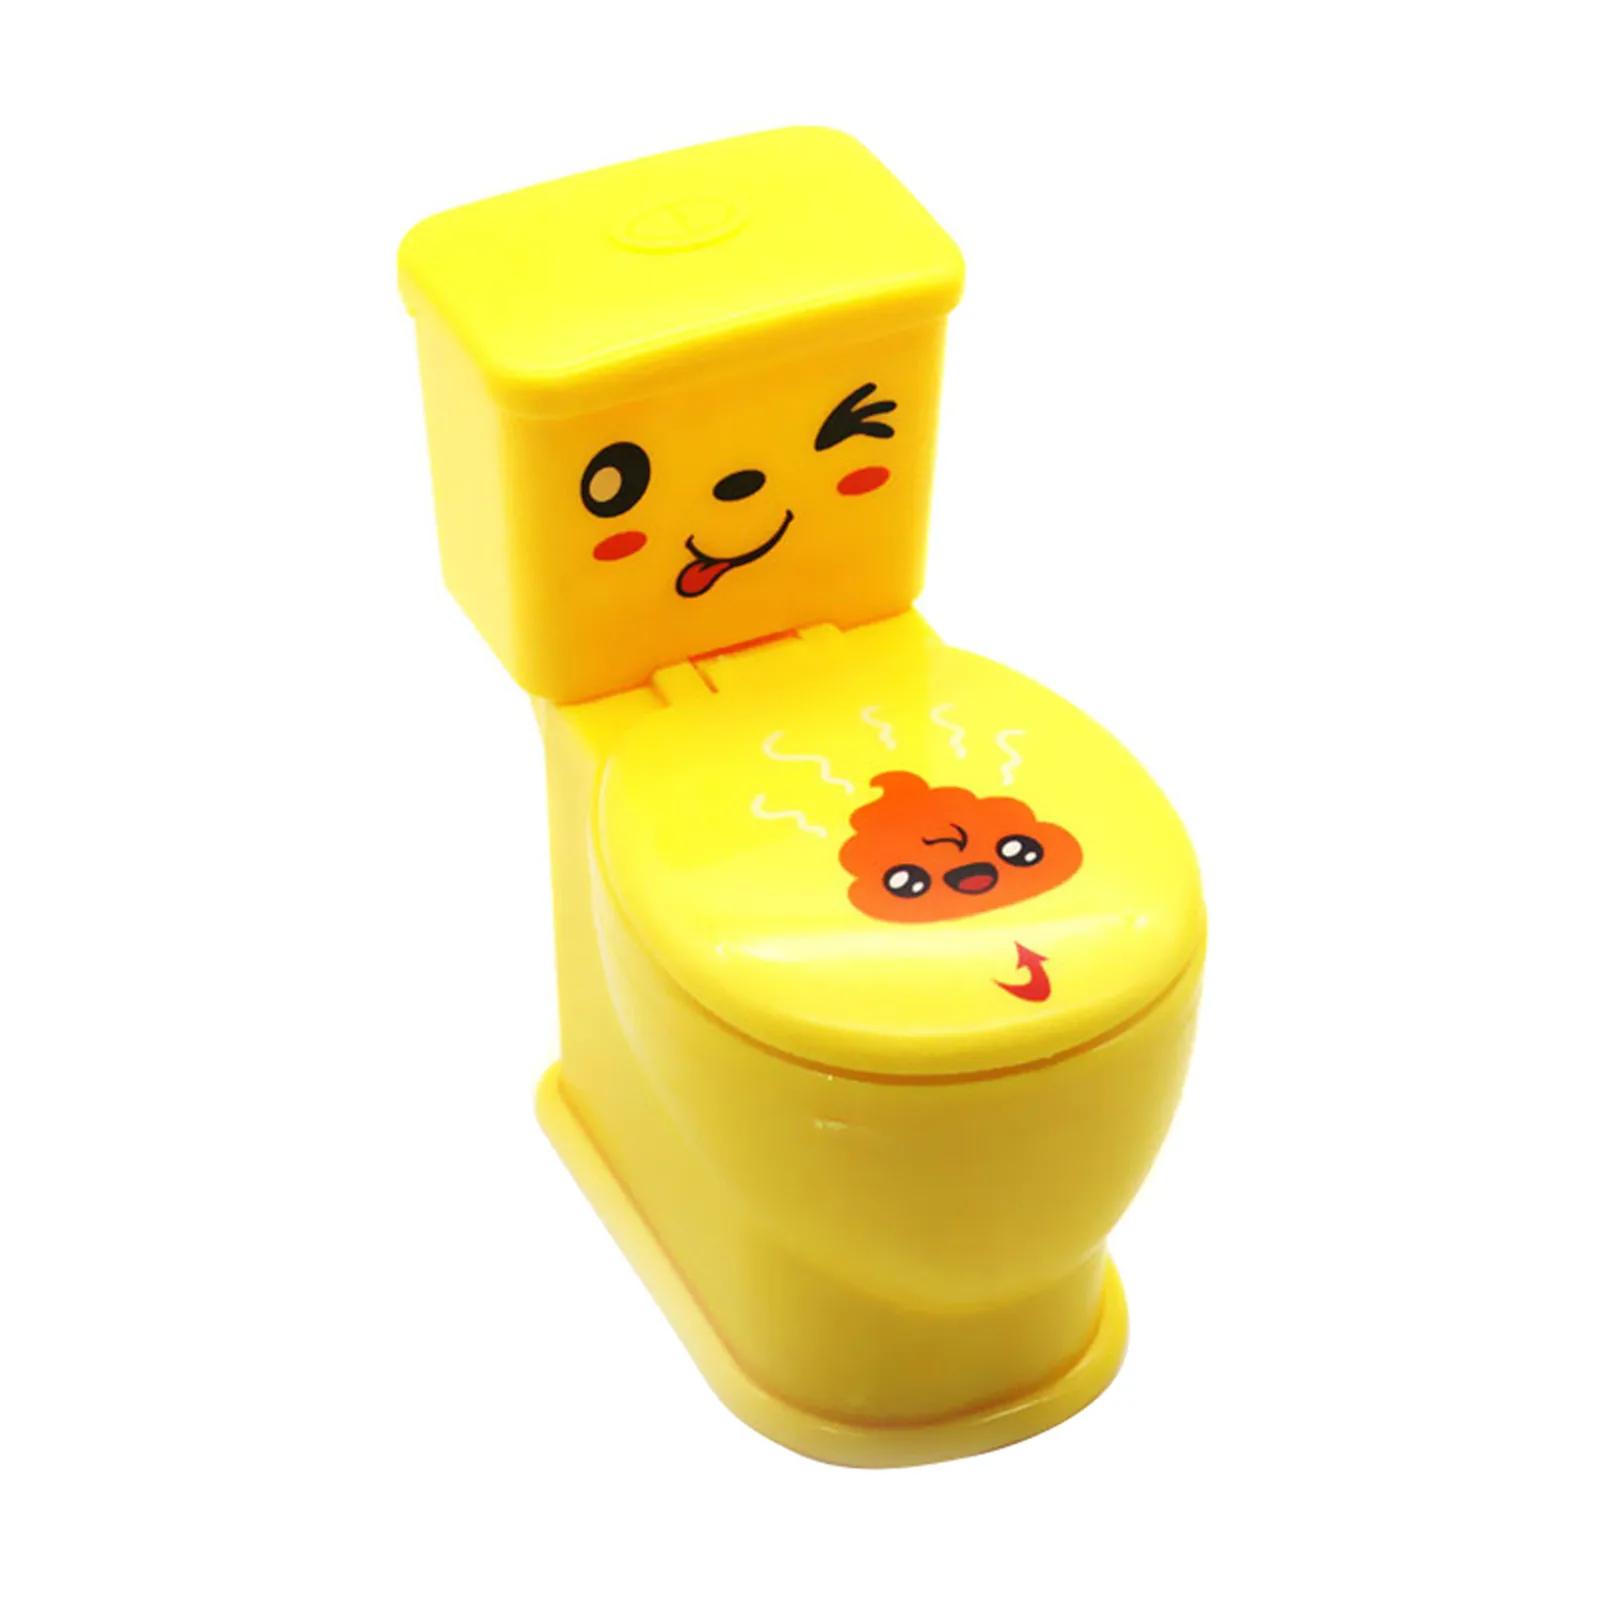 

Tricky Toy Mini Water Spray Toilet Closestool Spoof Prank Toy Gift For Kids